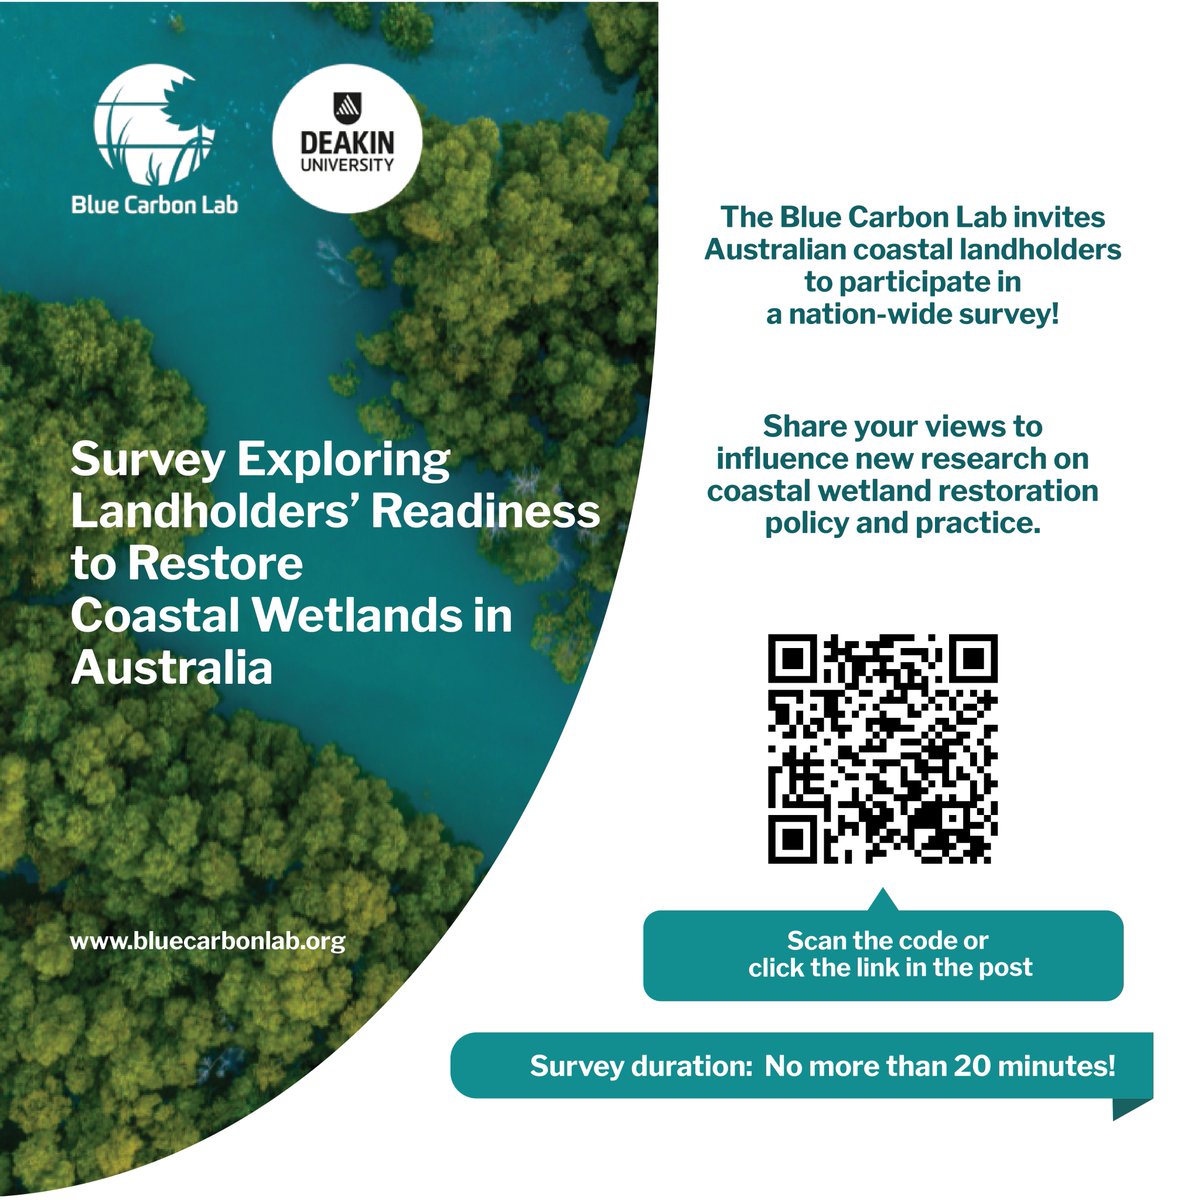 🌊 Calling all Australian Coastal Landholders! Join @BlueCarbonLab's nationwide survey to understand landholders’ readiness to restore coastal wetlands. Your insights matter and can influence policy & practice to enhance restoration efforts! Contribute: researchsurveys.deakin.edu.au/jfe/form/SV_9L…